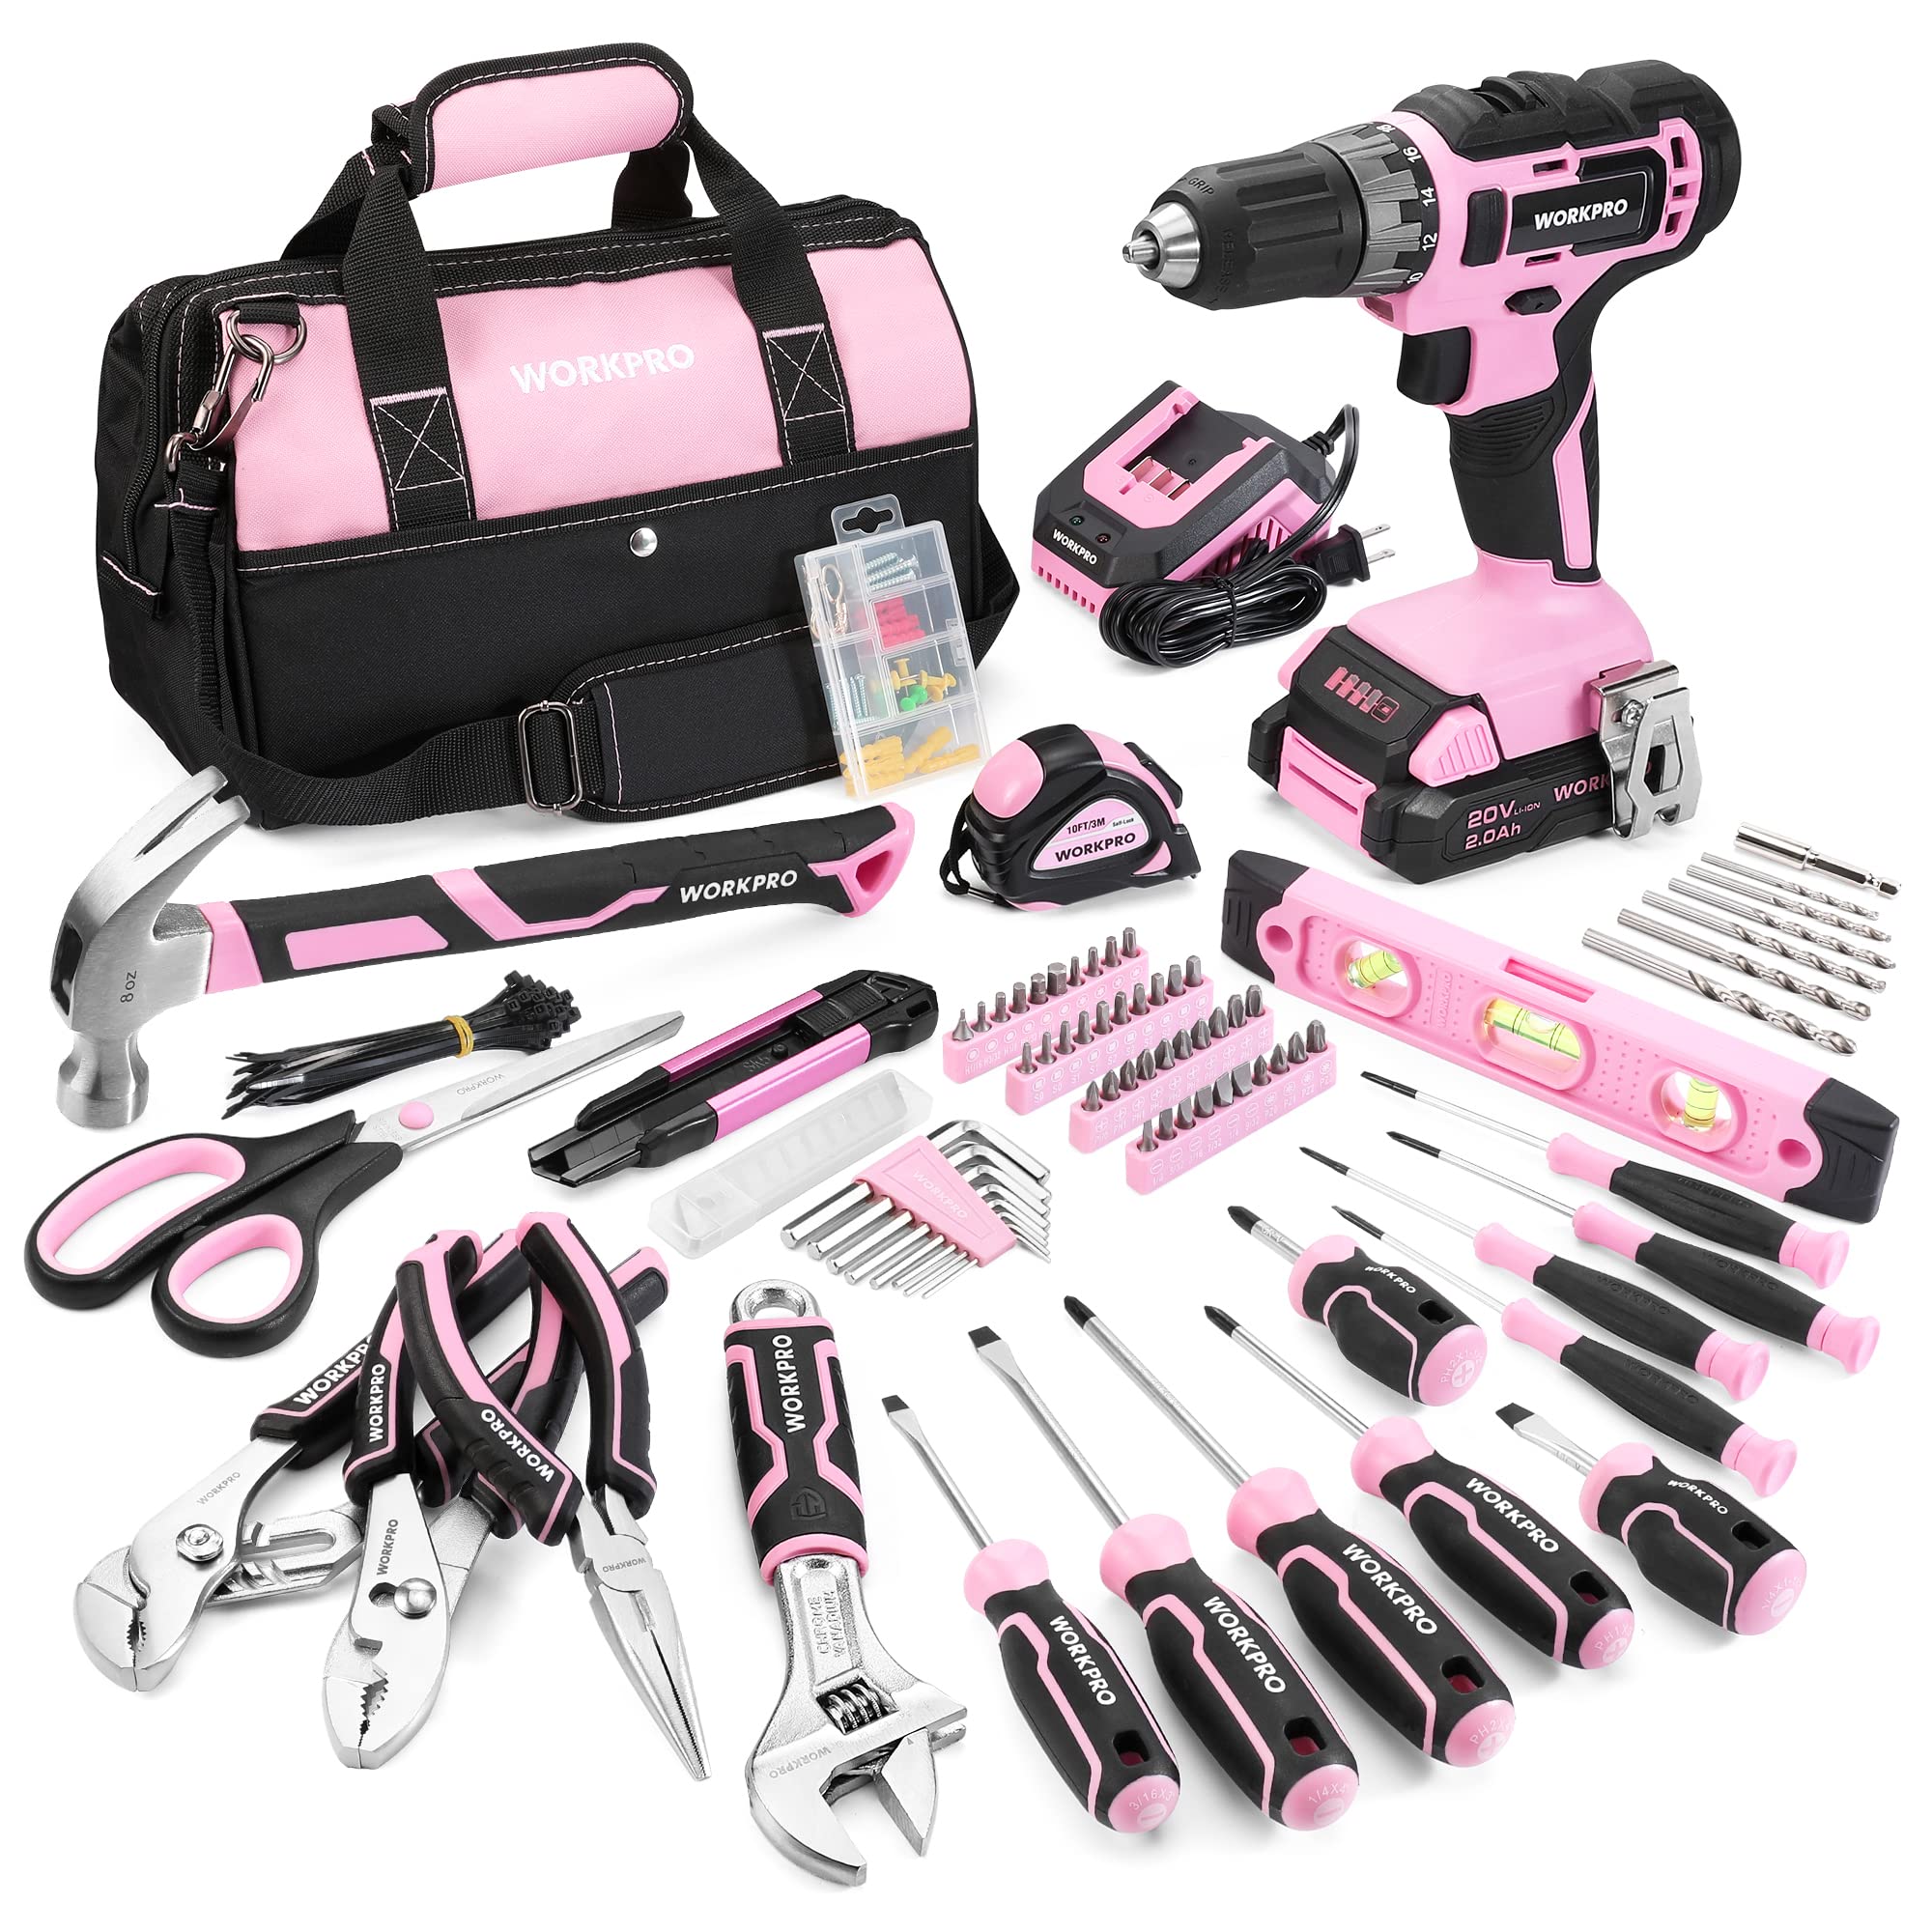 WORKPRO Pink Household Tool Kit with Drill, 157PCS Women Pink Tool Set with 20V Cordless Lithium-ion Drill Driver, Home Tool Kit for All Purpose, Power Drill Sets with Pink Tool Bag - Pink Ribbon